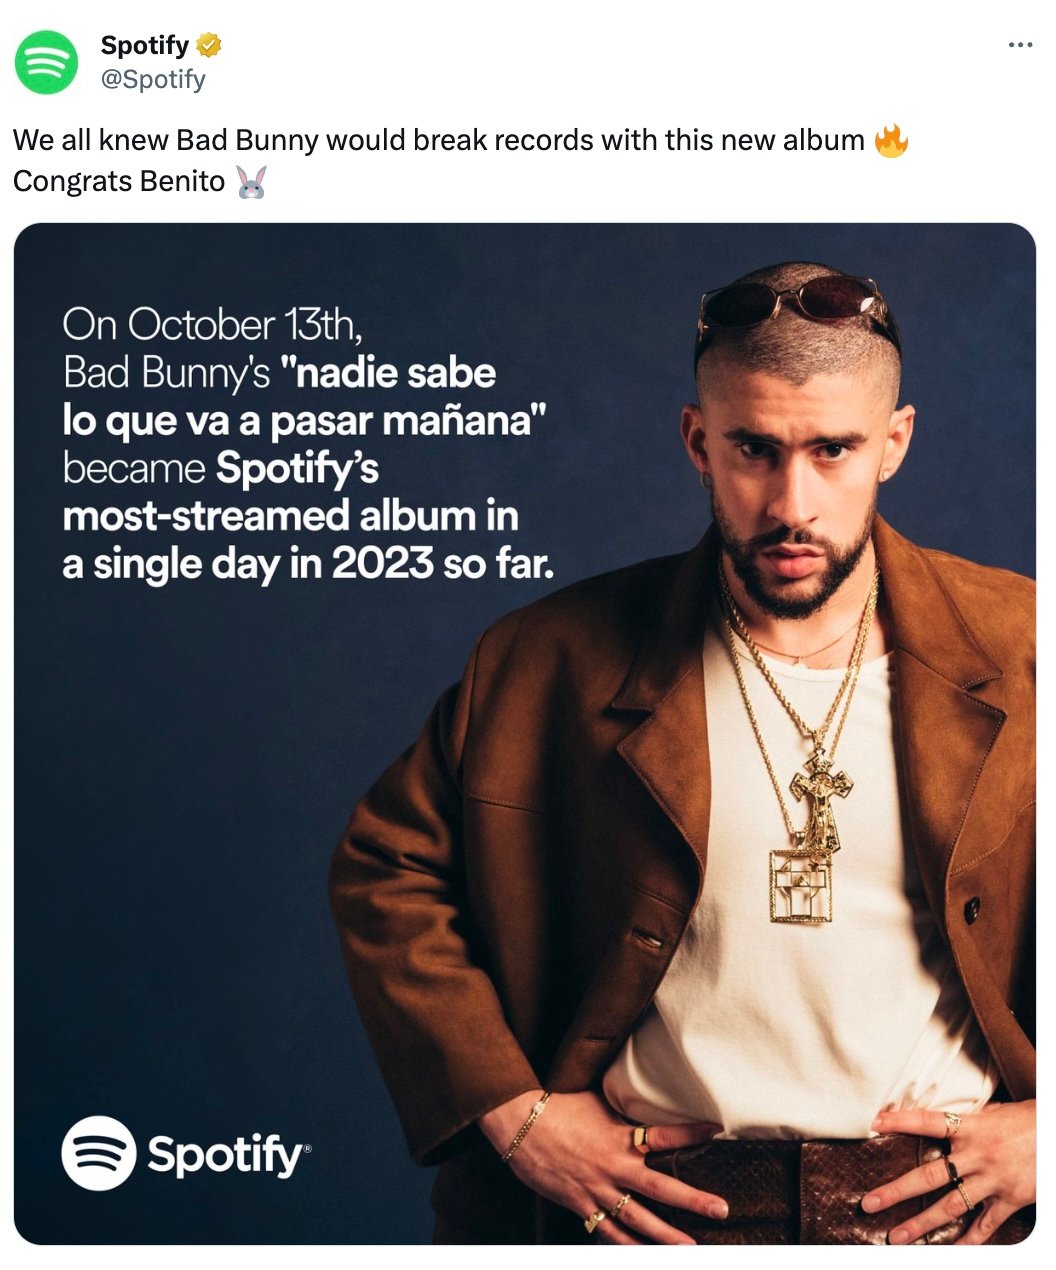 Bad Bunny breaks Spotify record for most-streamed album in a